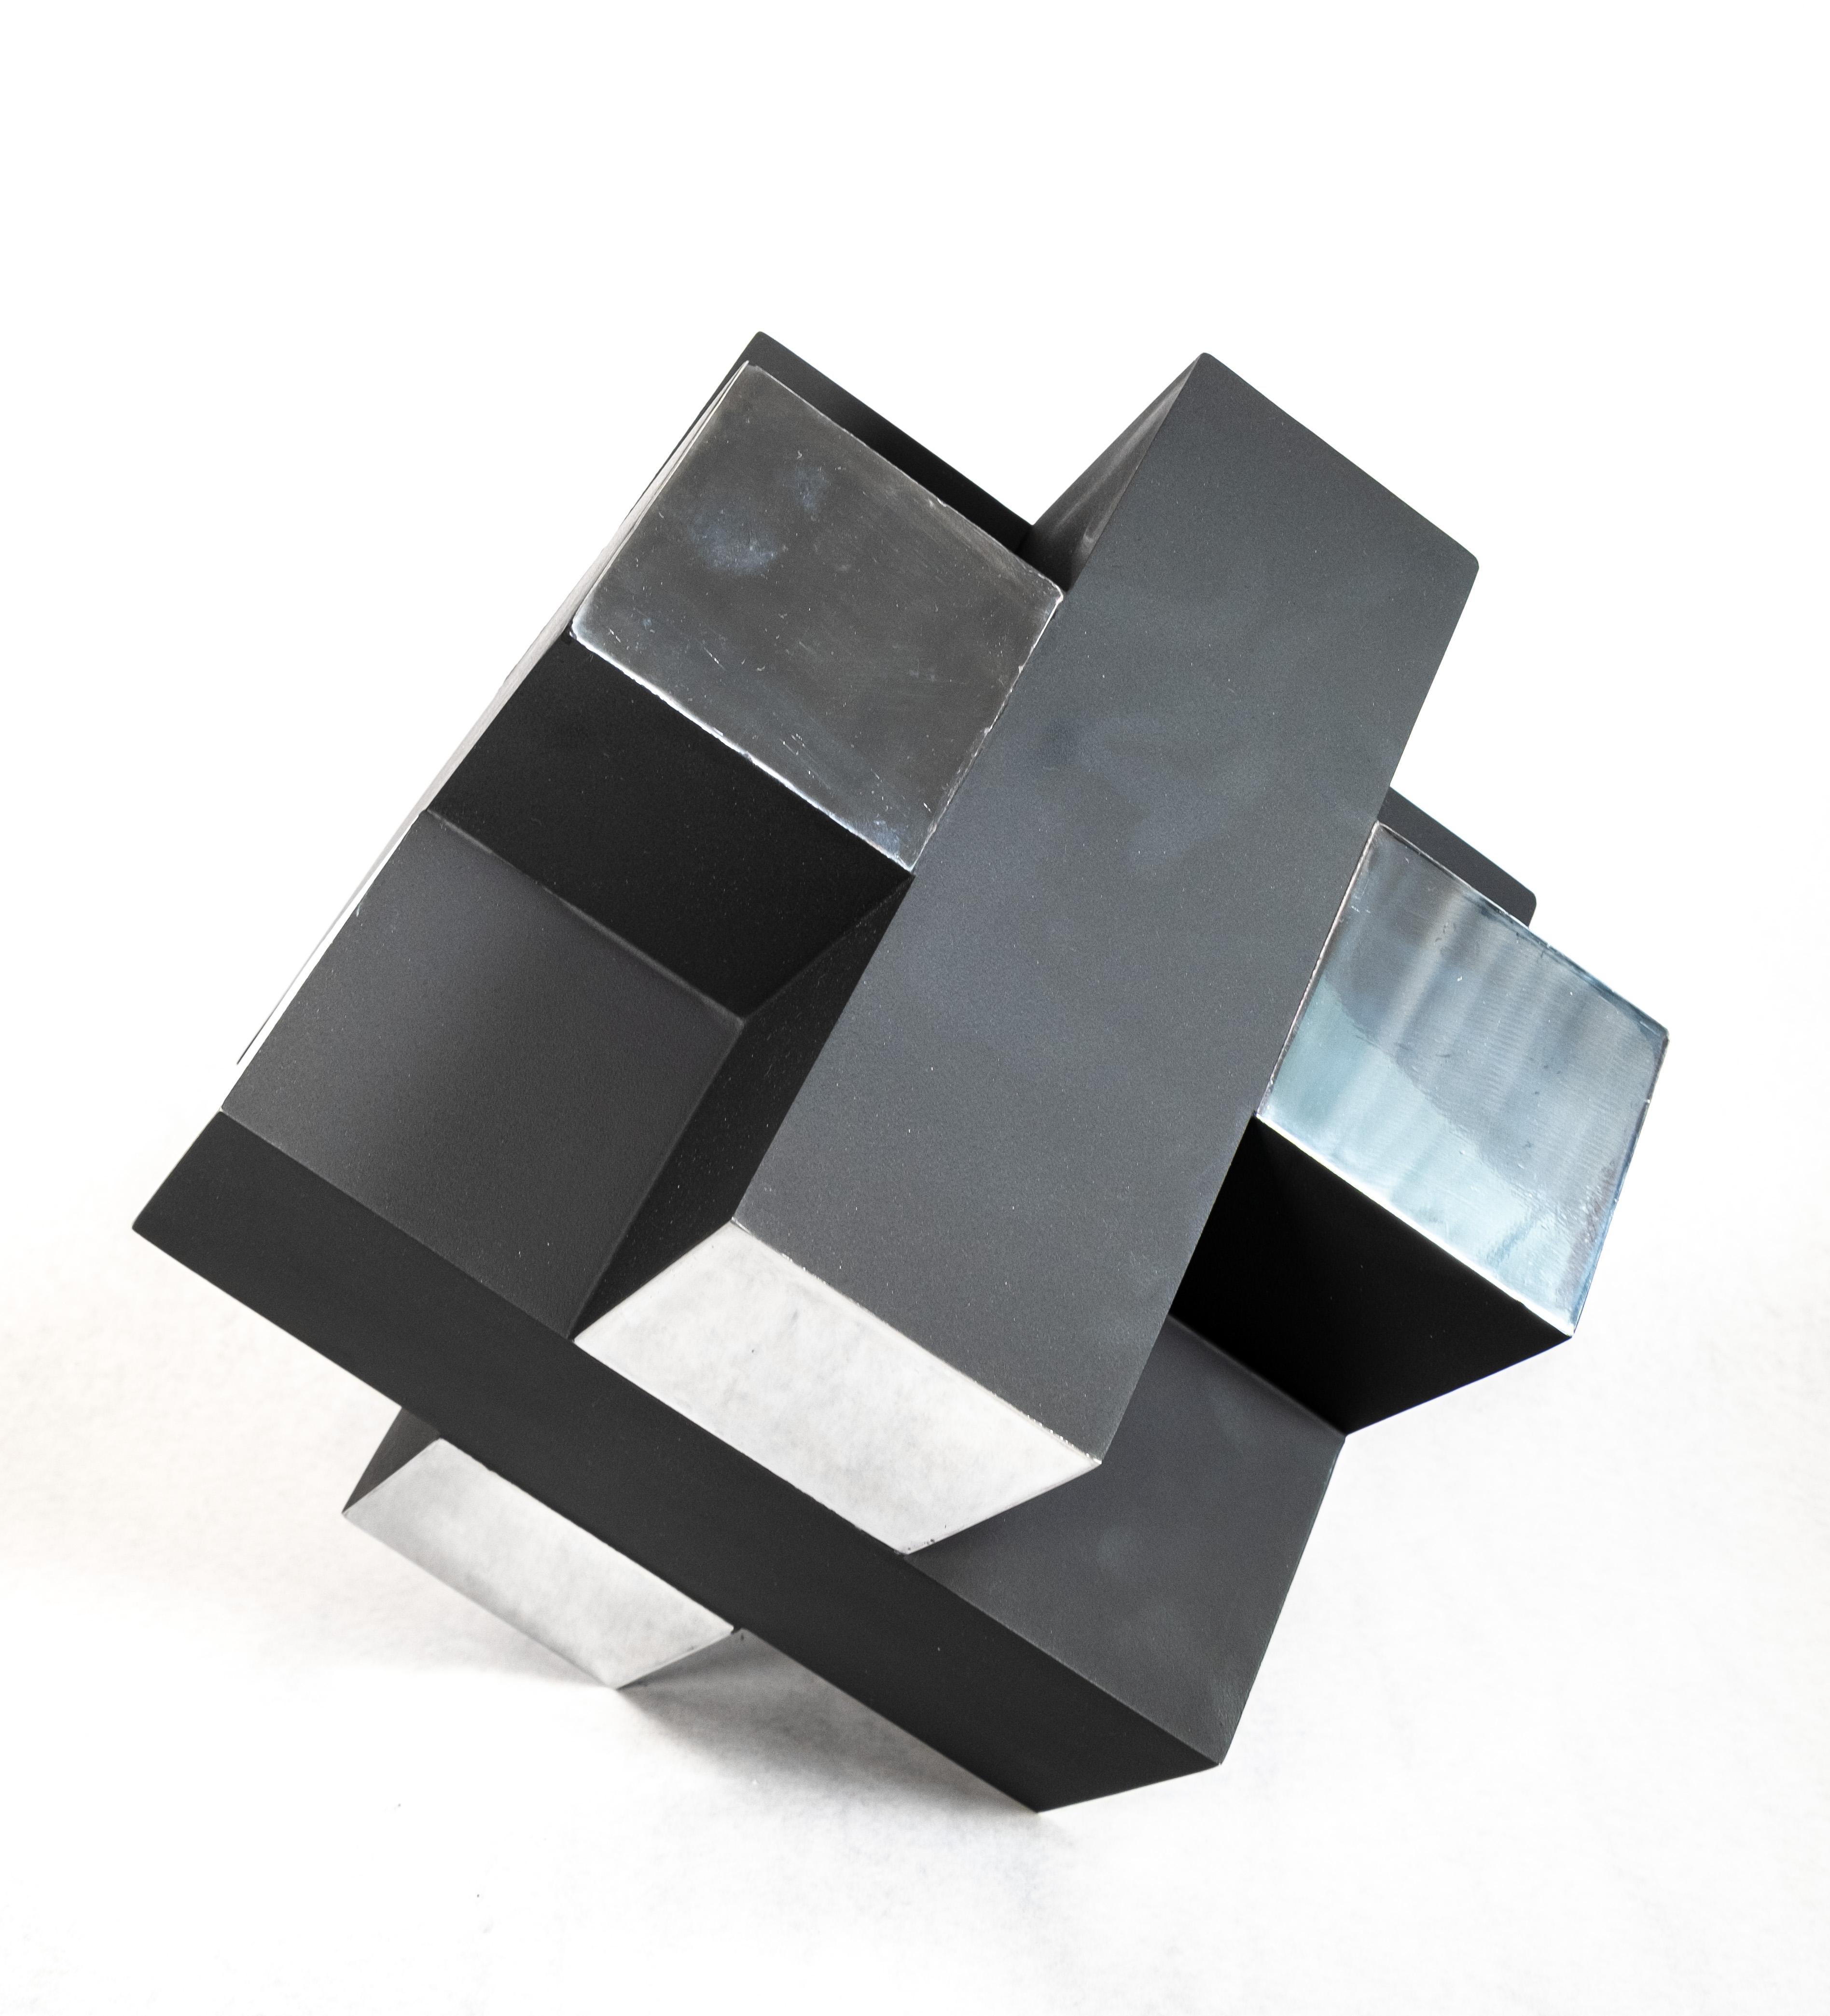 12 Inch Cube Black 1/10 - modern, intersecting geometric, aluminum sculpture - Contemporary Sculpture by Philippe Pallafray